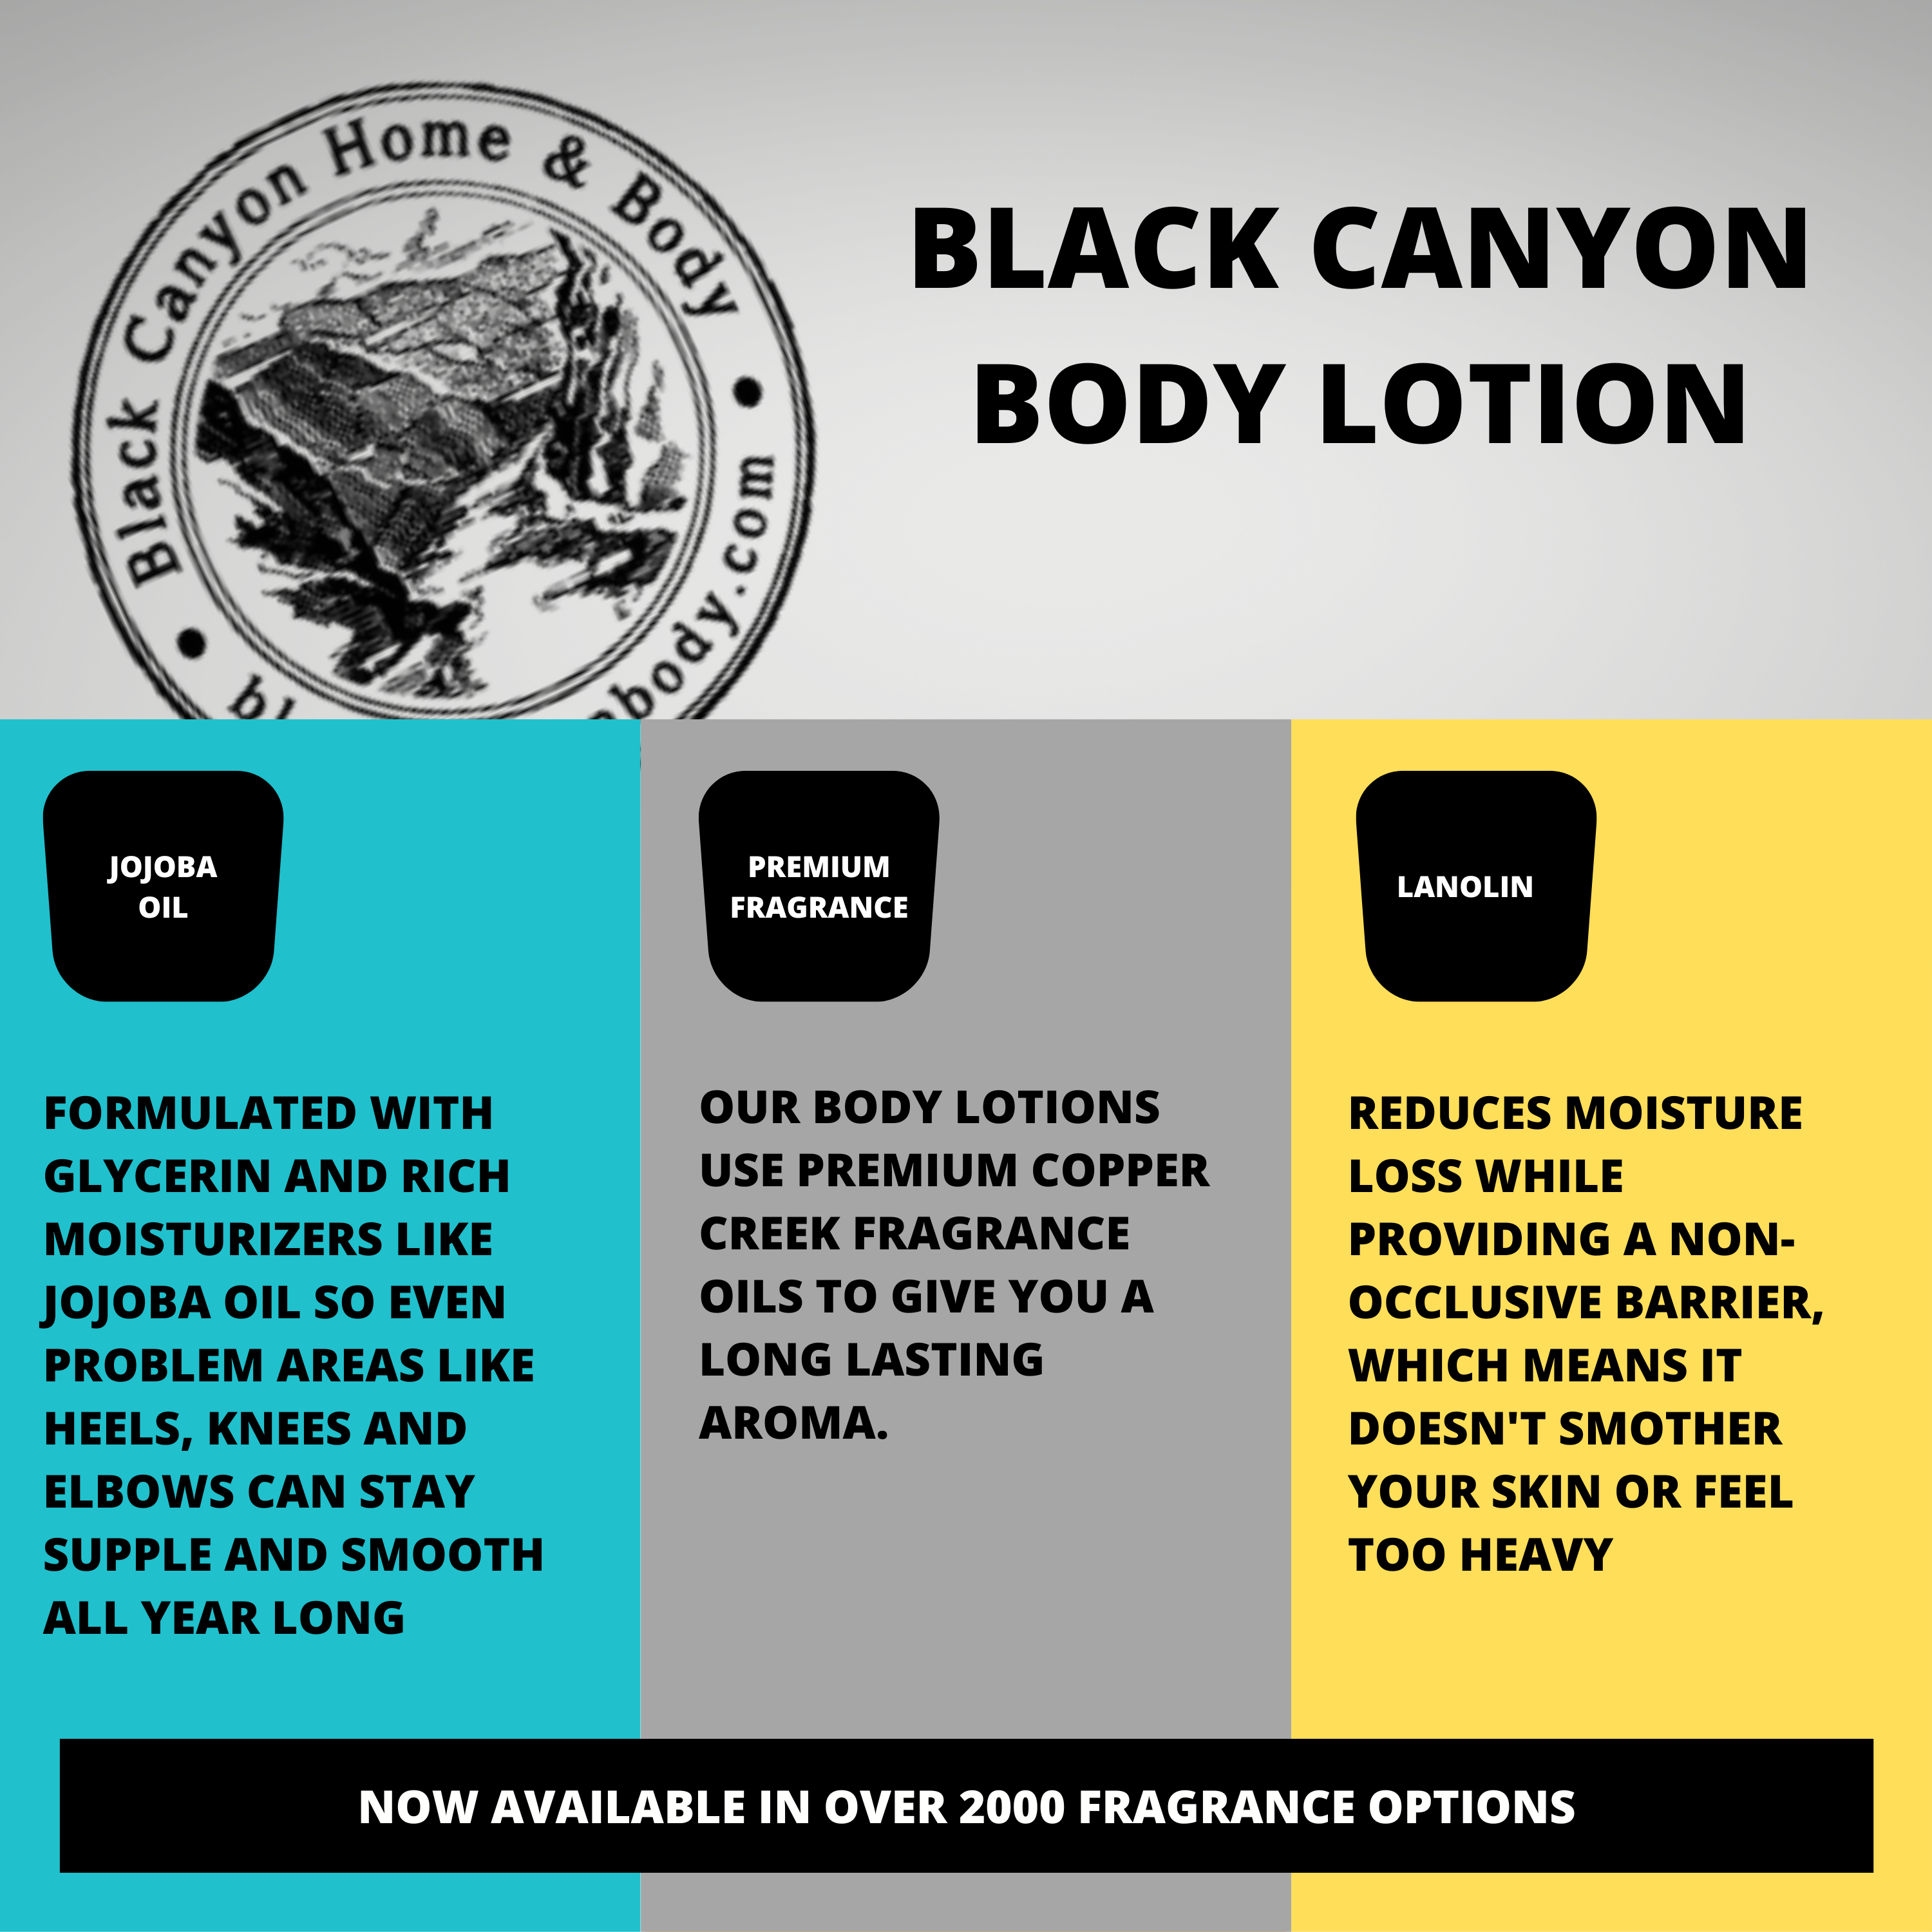 Black Canyon Simply Sensual Scented Luxury Body Lotion with Lanolin and Jojoba Oil